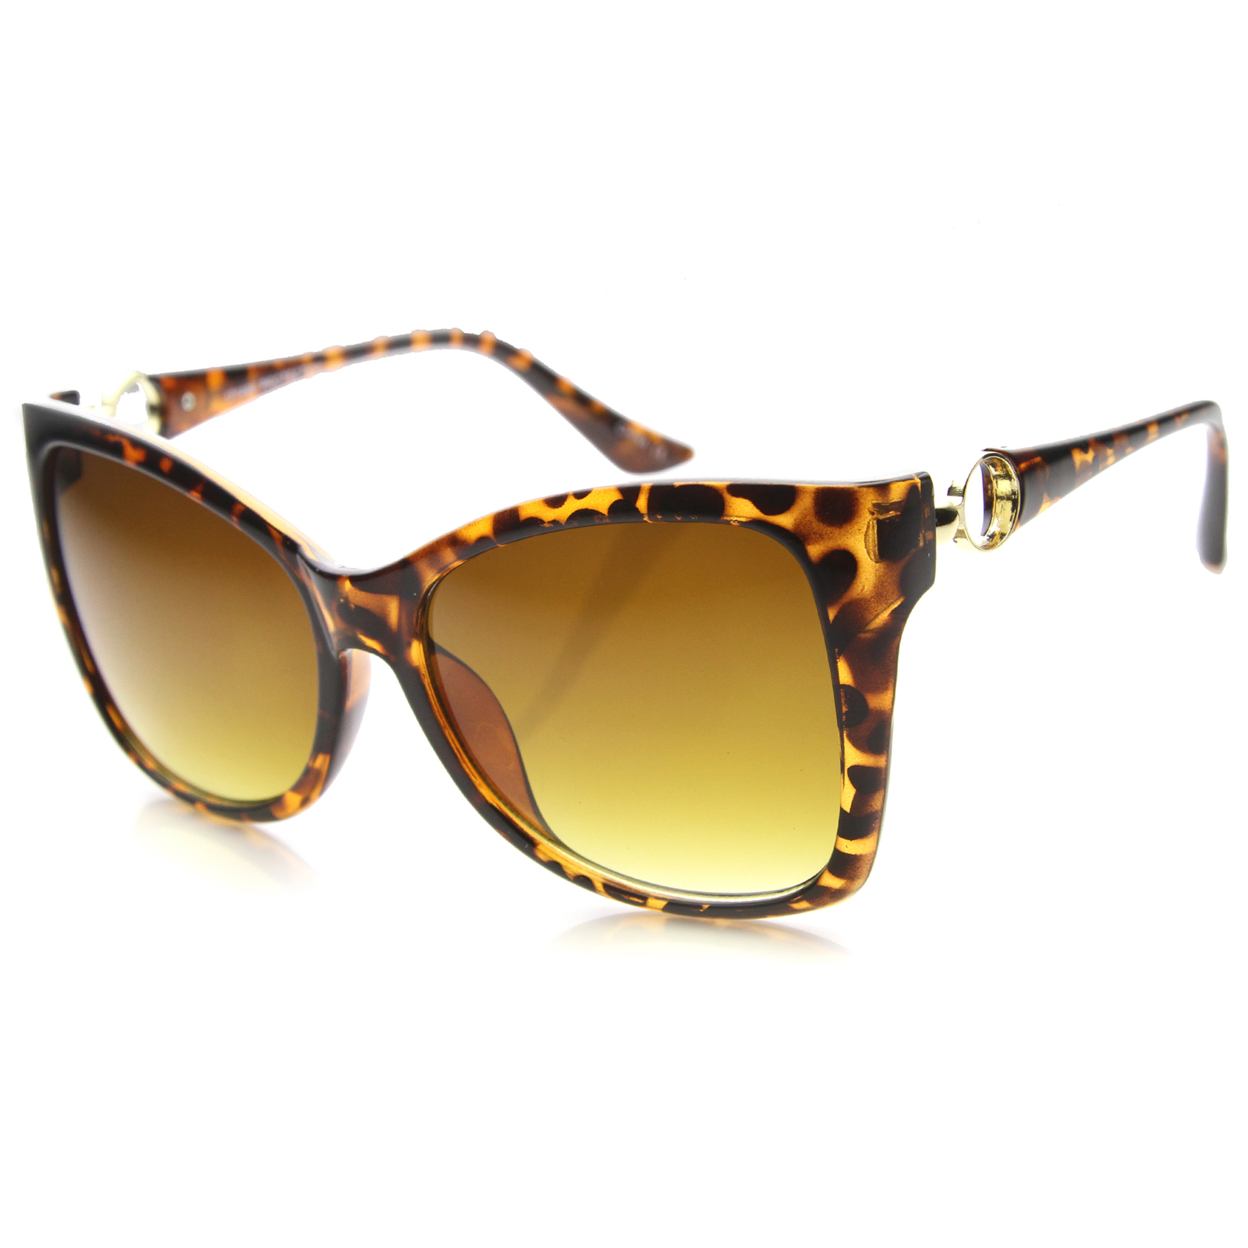 Womens Cat Eye Sunglasses With UV400 Protected Gradient Lens 9938 - Tortoise-Gold / Amber